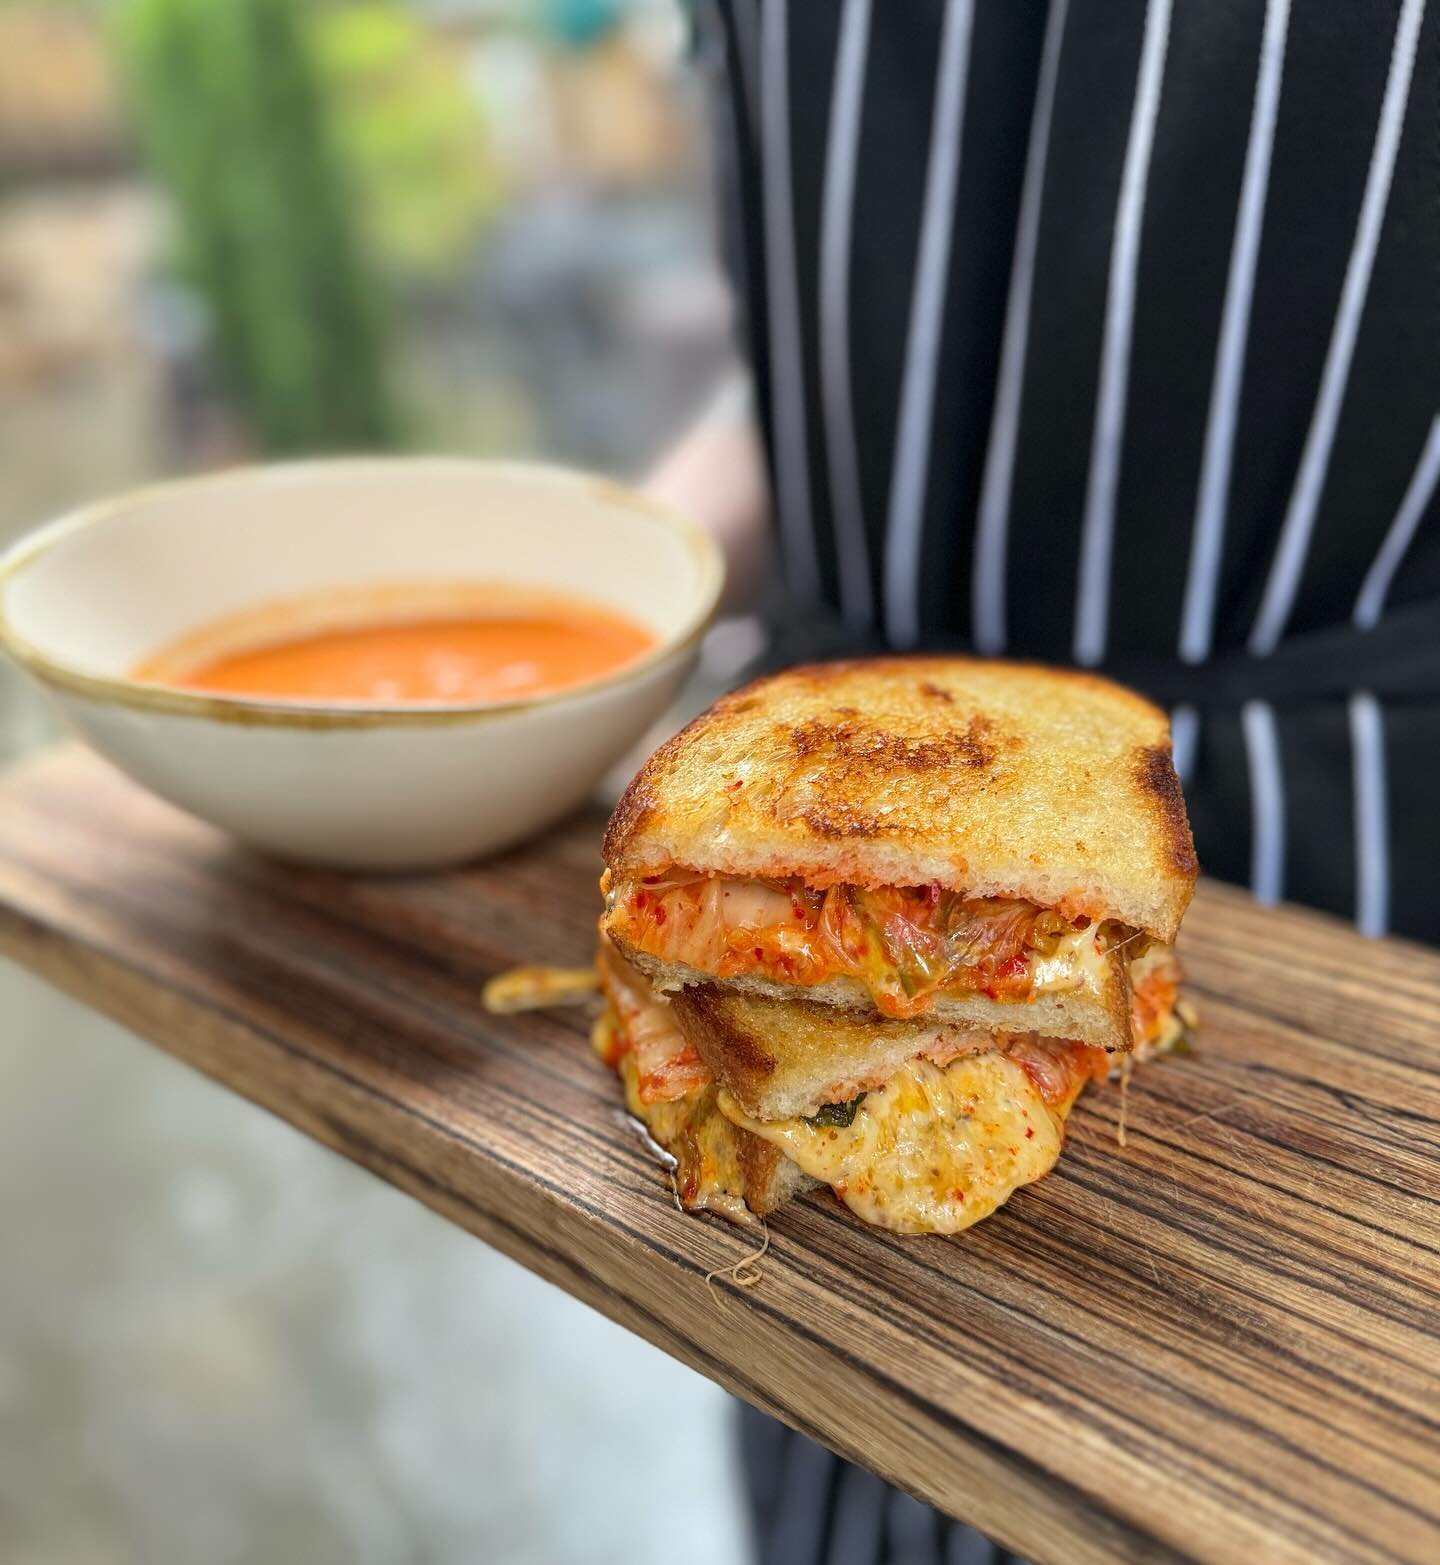 Chase this rain away with our kimchi grilled cheese! Melted Swiss and cheddar with spicy kimchi on your choice of butter toasted multigrain or sourdough! Goes perfectly with our tomato basil soup 😋😏

Available today and tomorrow till 3pm!